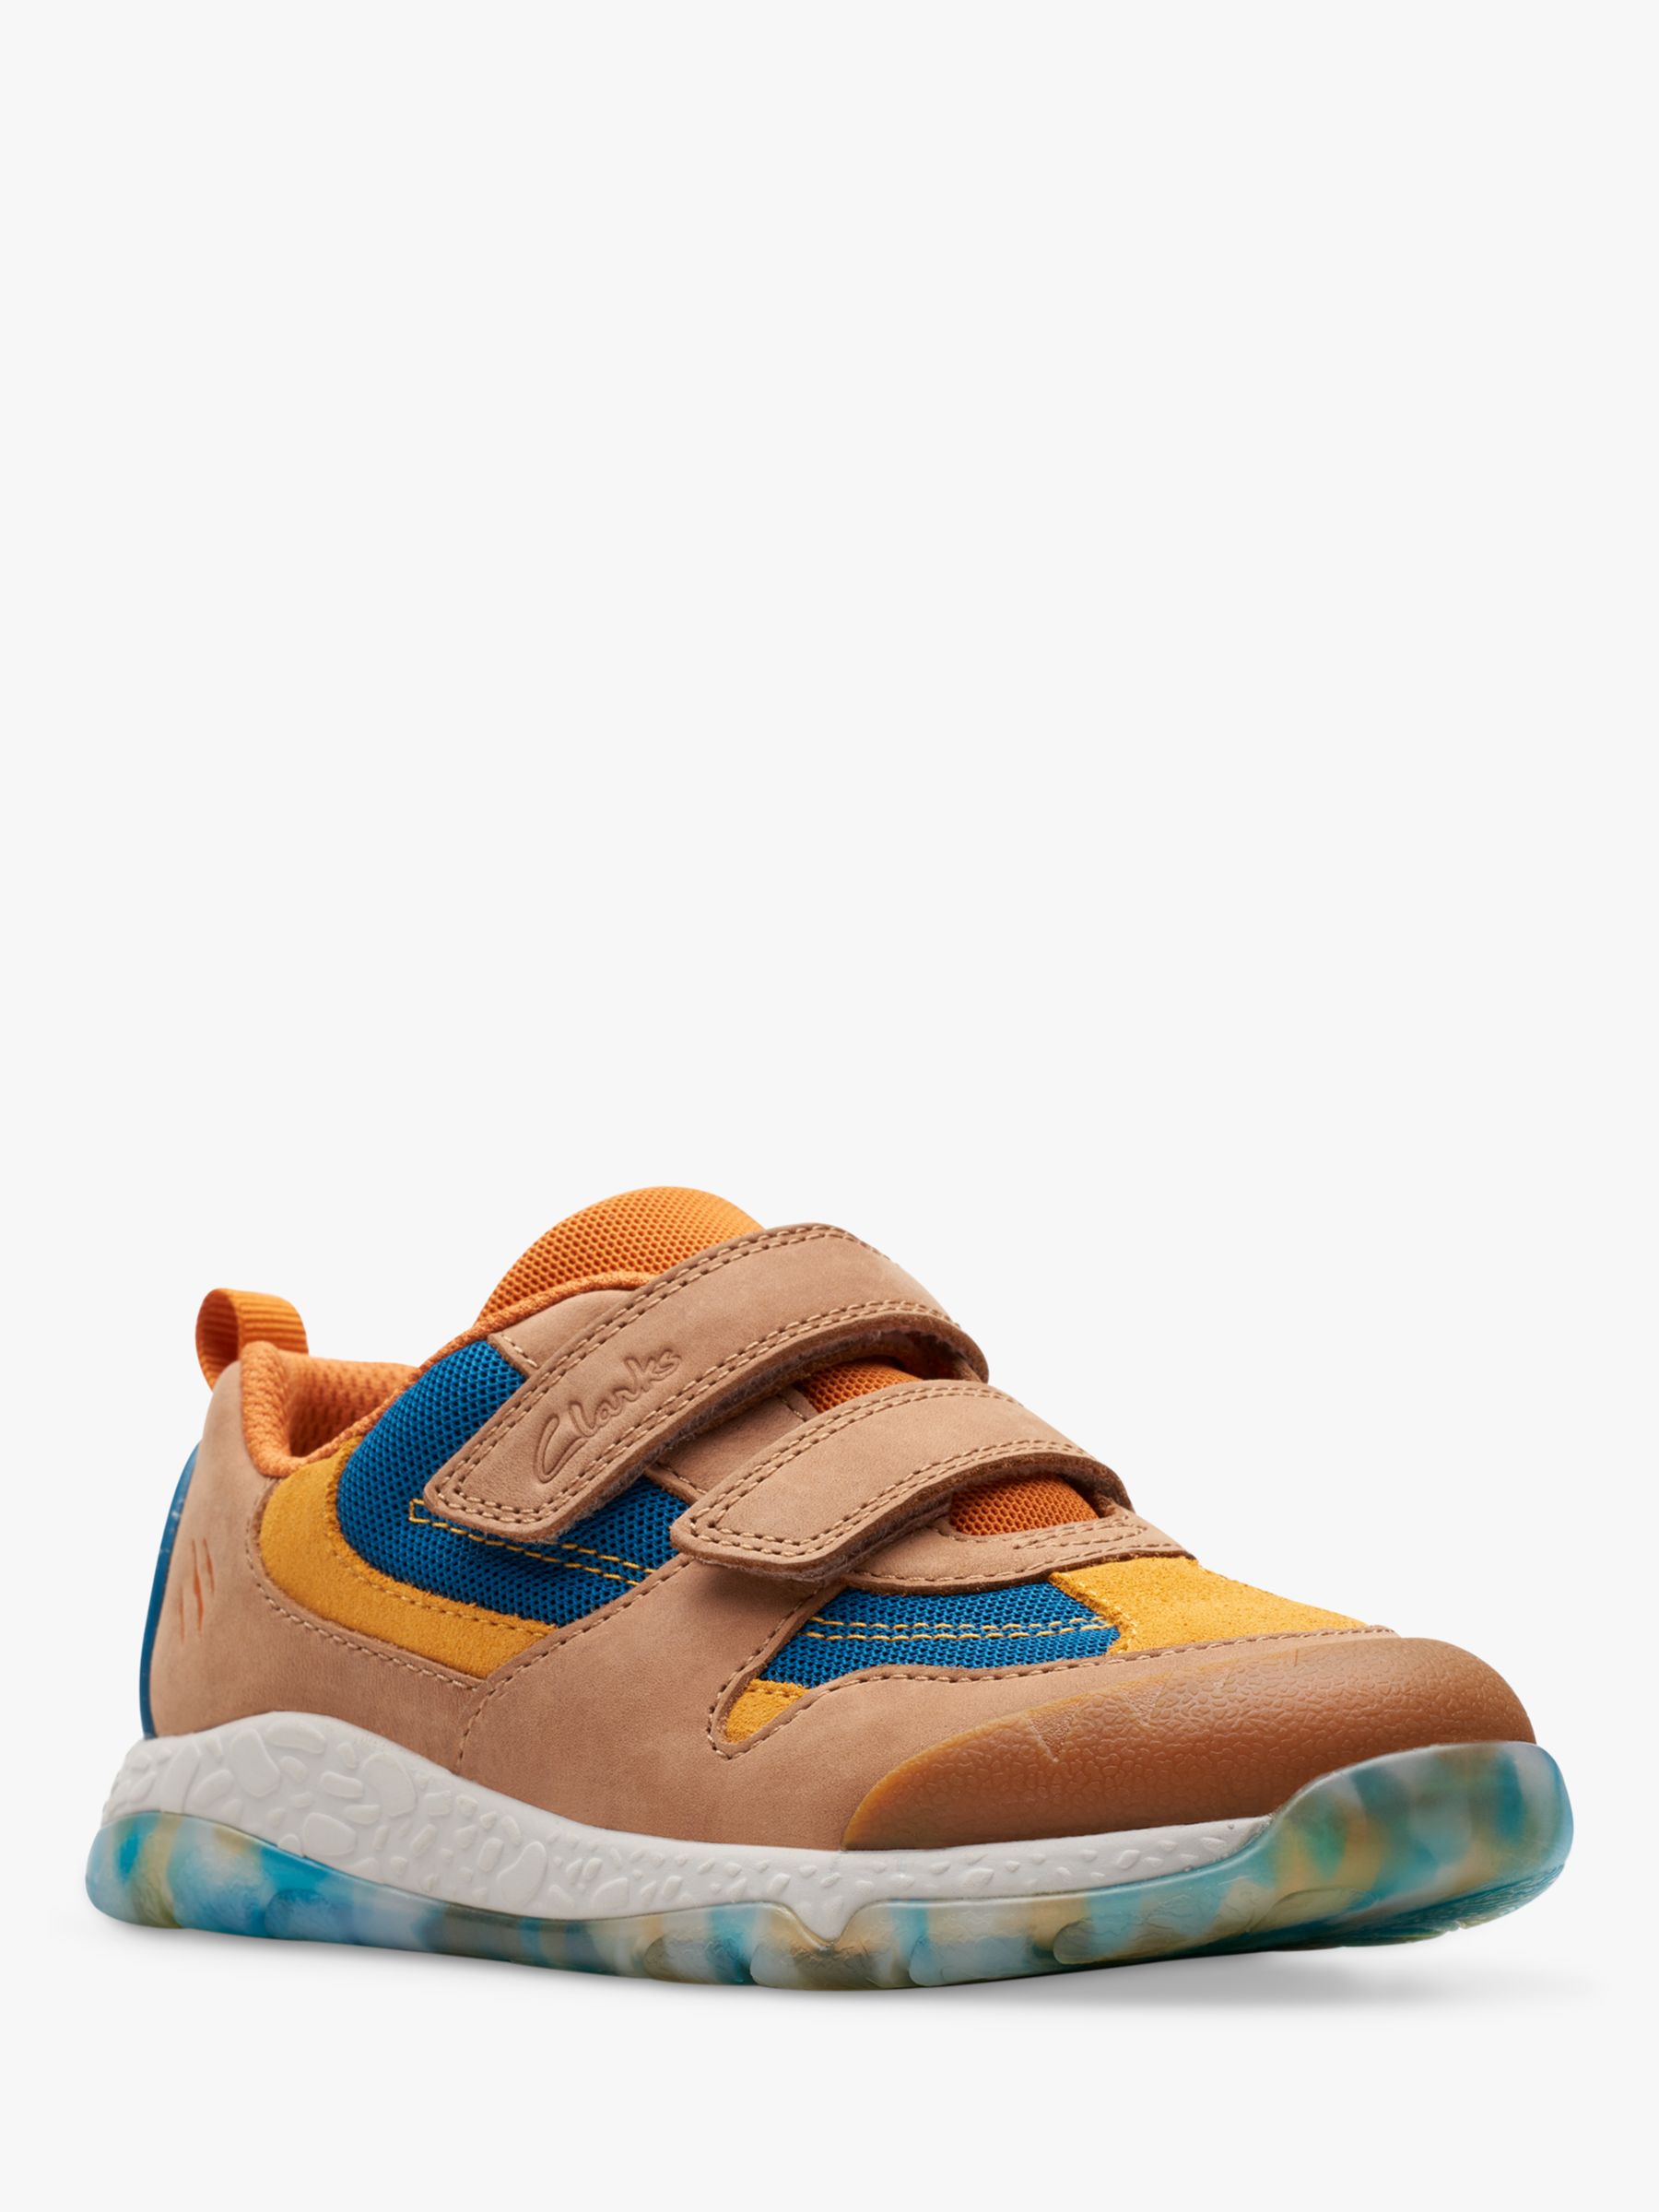 Clarks Kids' 3D Steggy Tail Fun Trainers, Tan at John Lewis & Partners